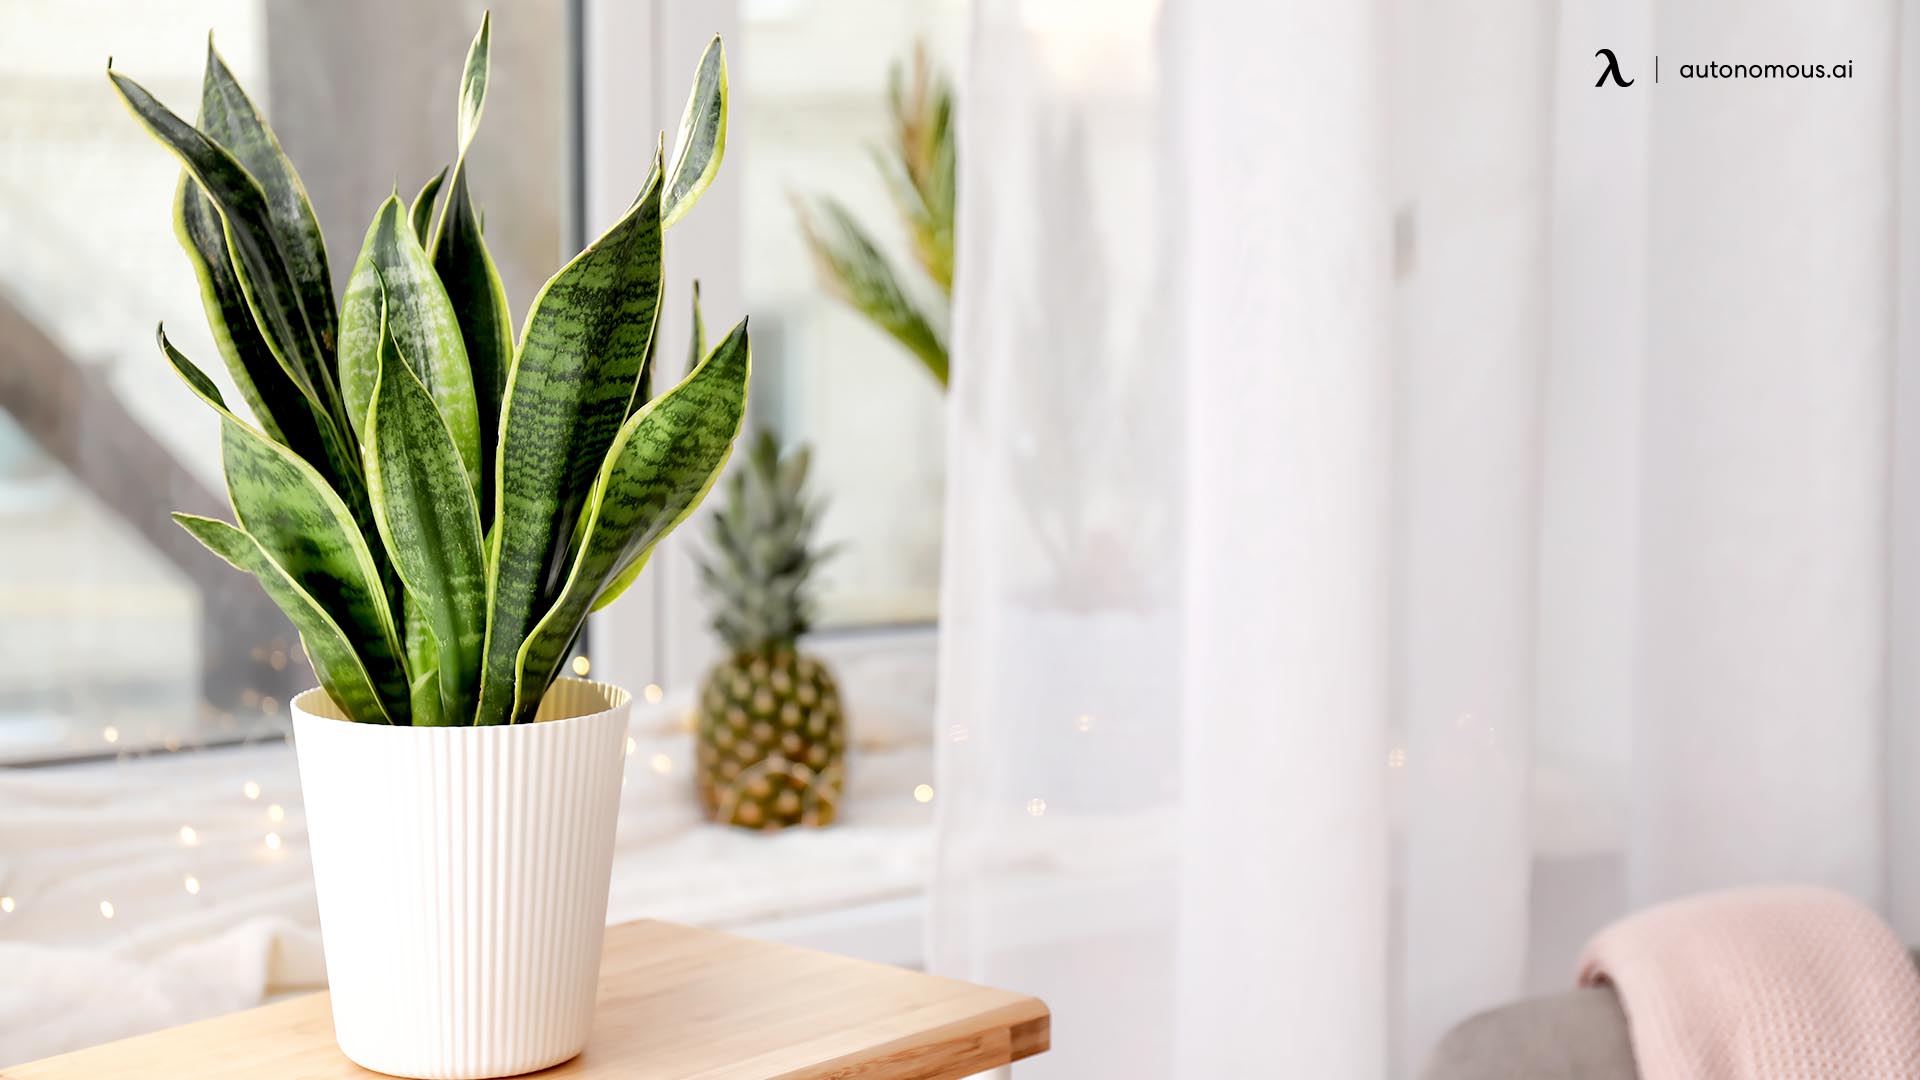 10 Best Office Desk Plants That Bring the Green to Workspace